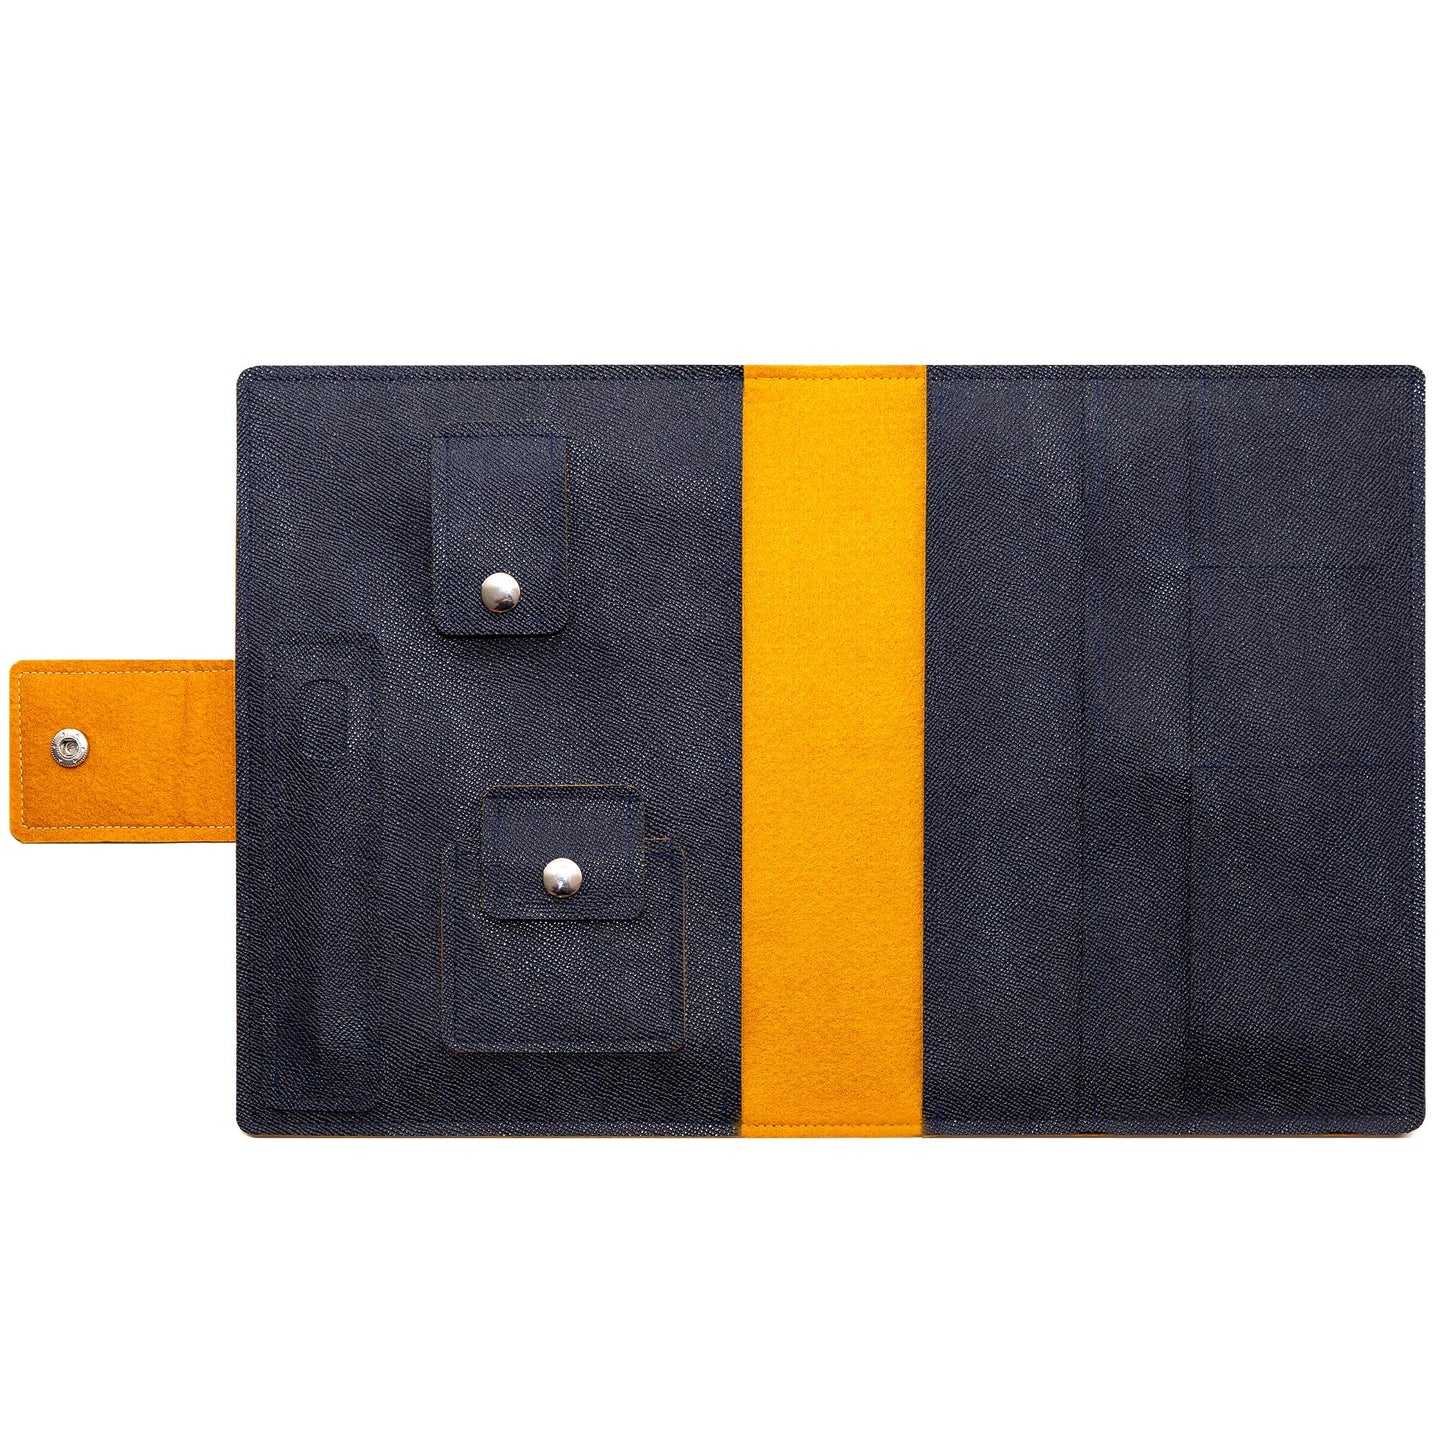 Handmade Folio Cover for iPad/Pro/Air - Navy & Mustard Faux Leather